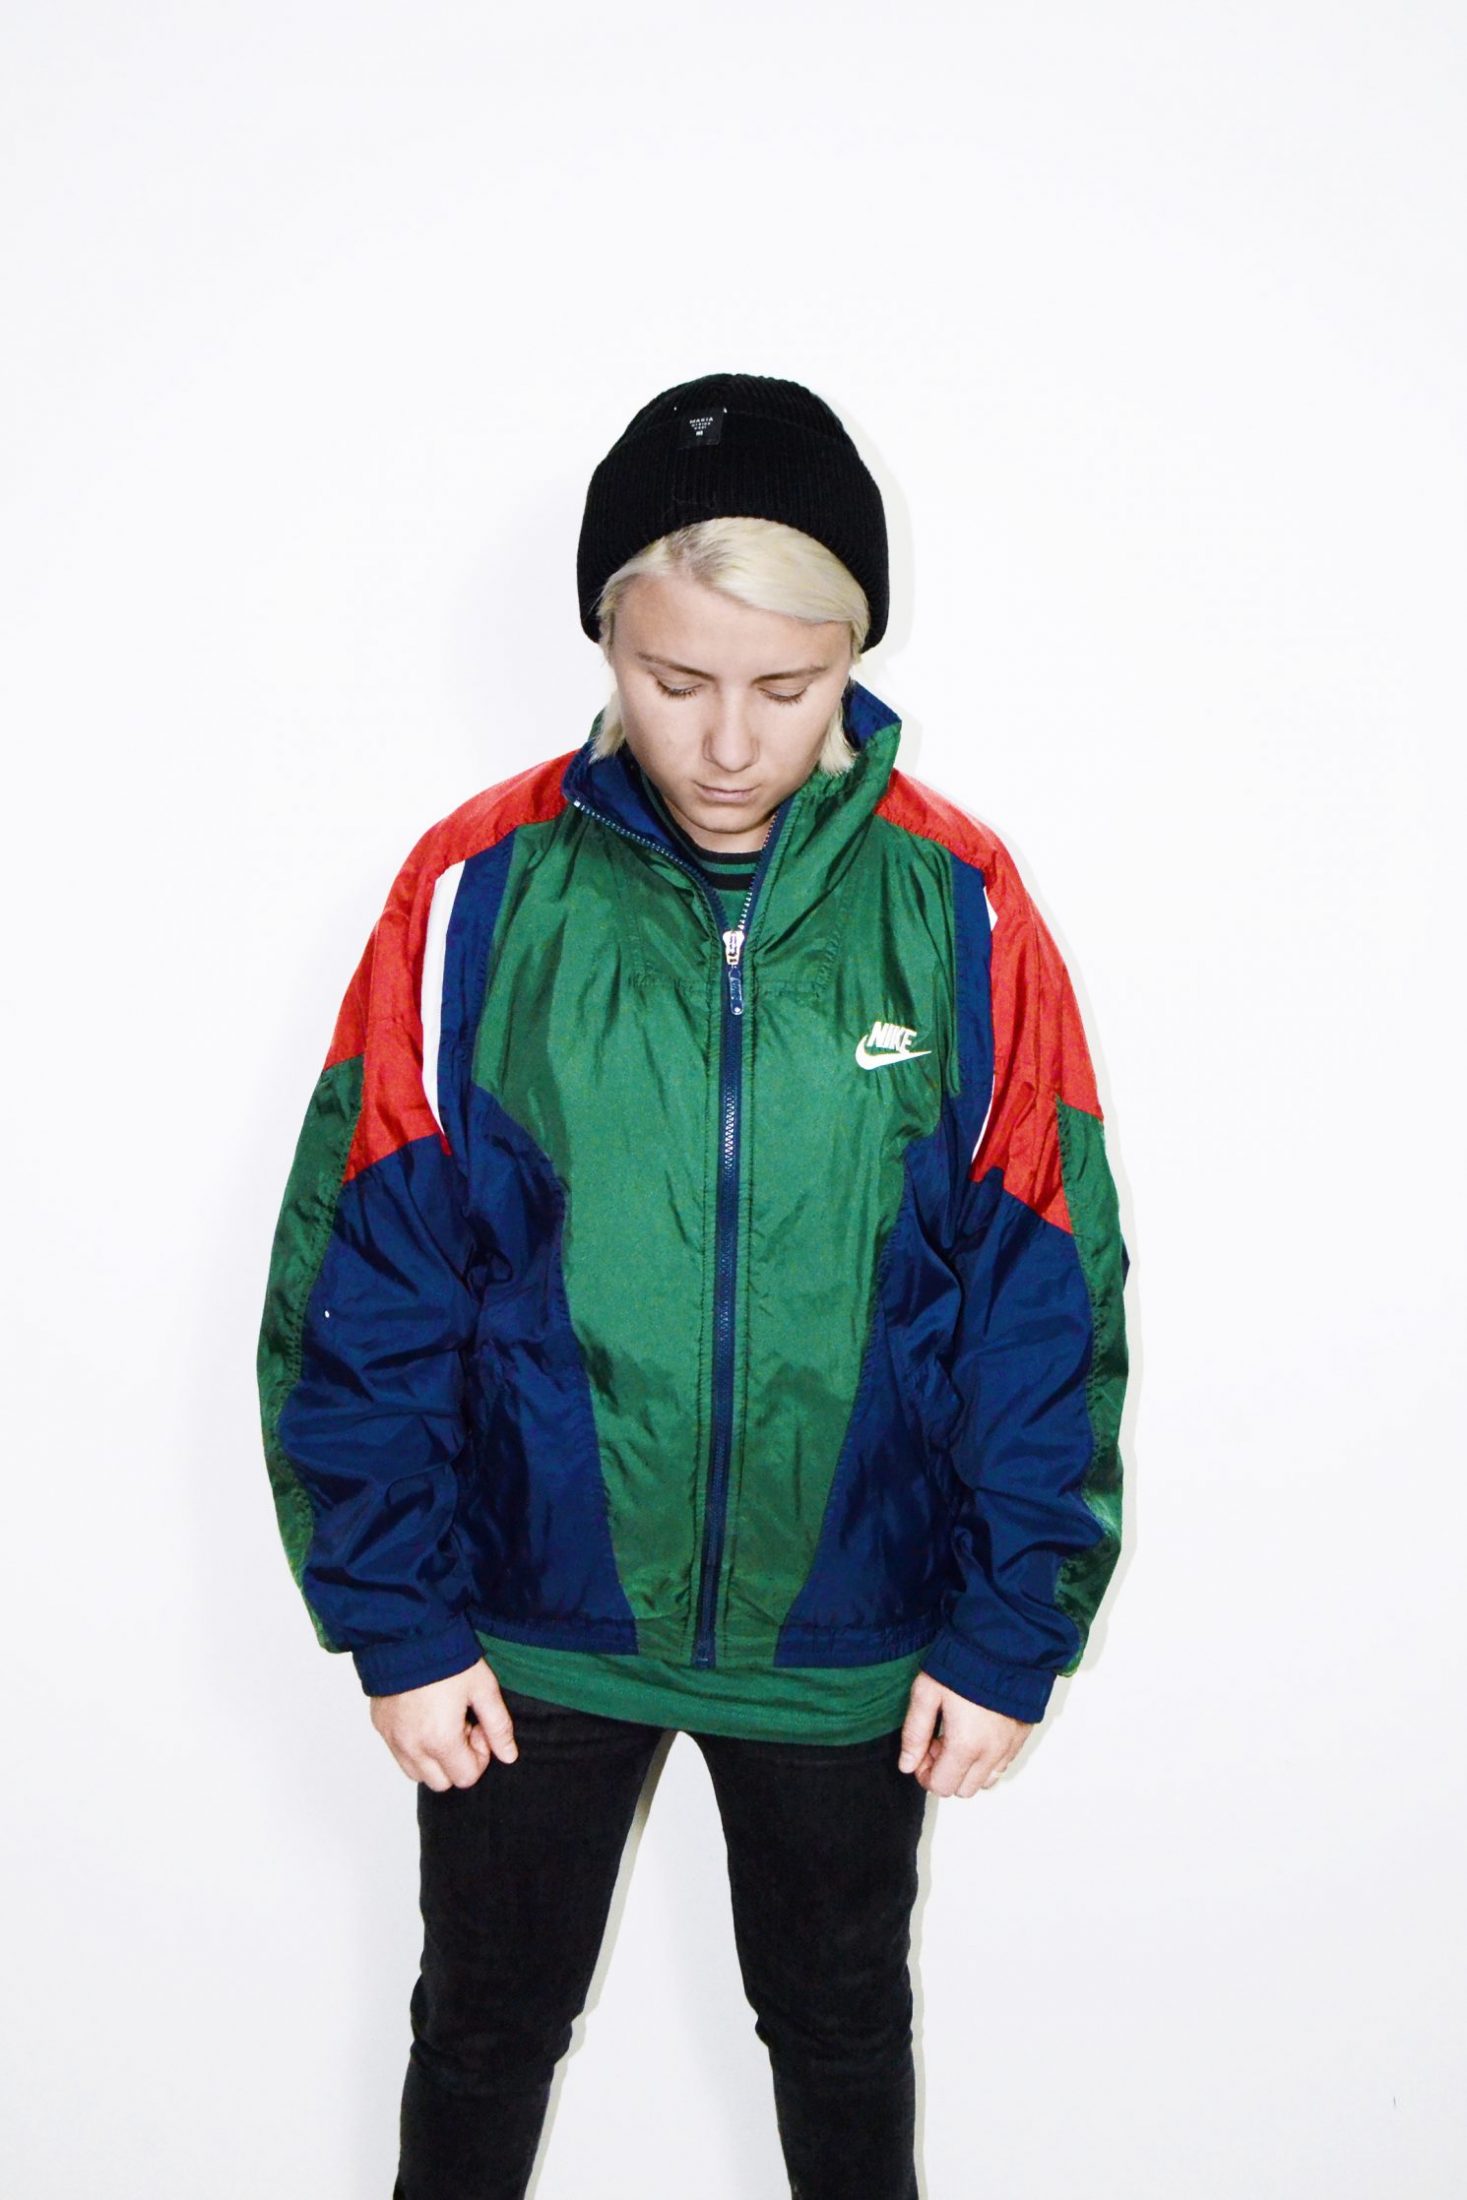 NIKE vintage shell jacket | The best 90's sport vintage clothing in Europe